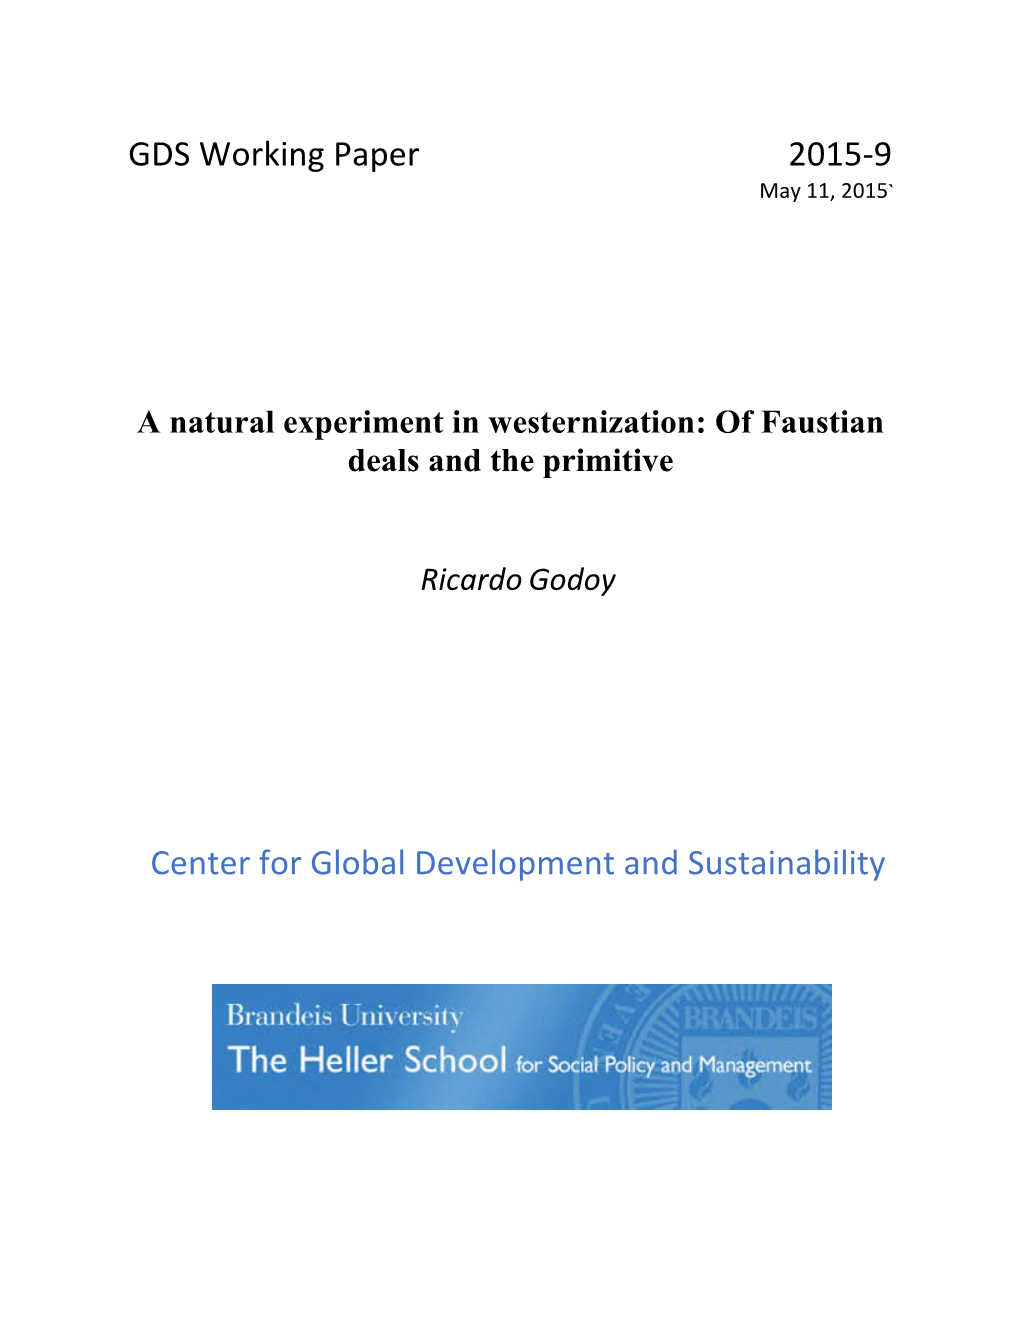 GDS Working Paper 2015-9 May 11, 2015`